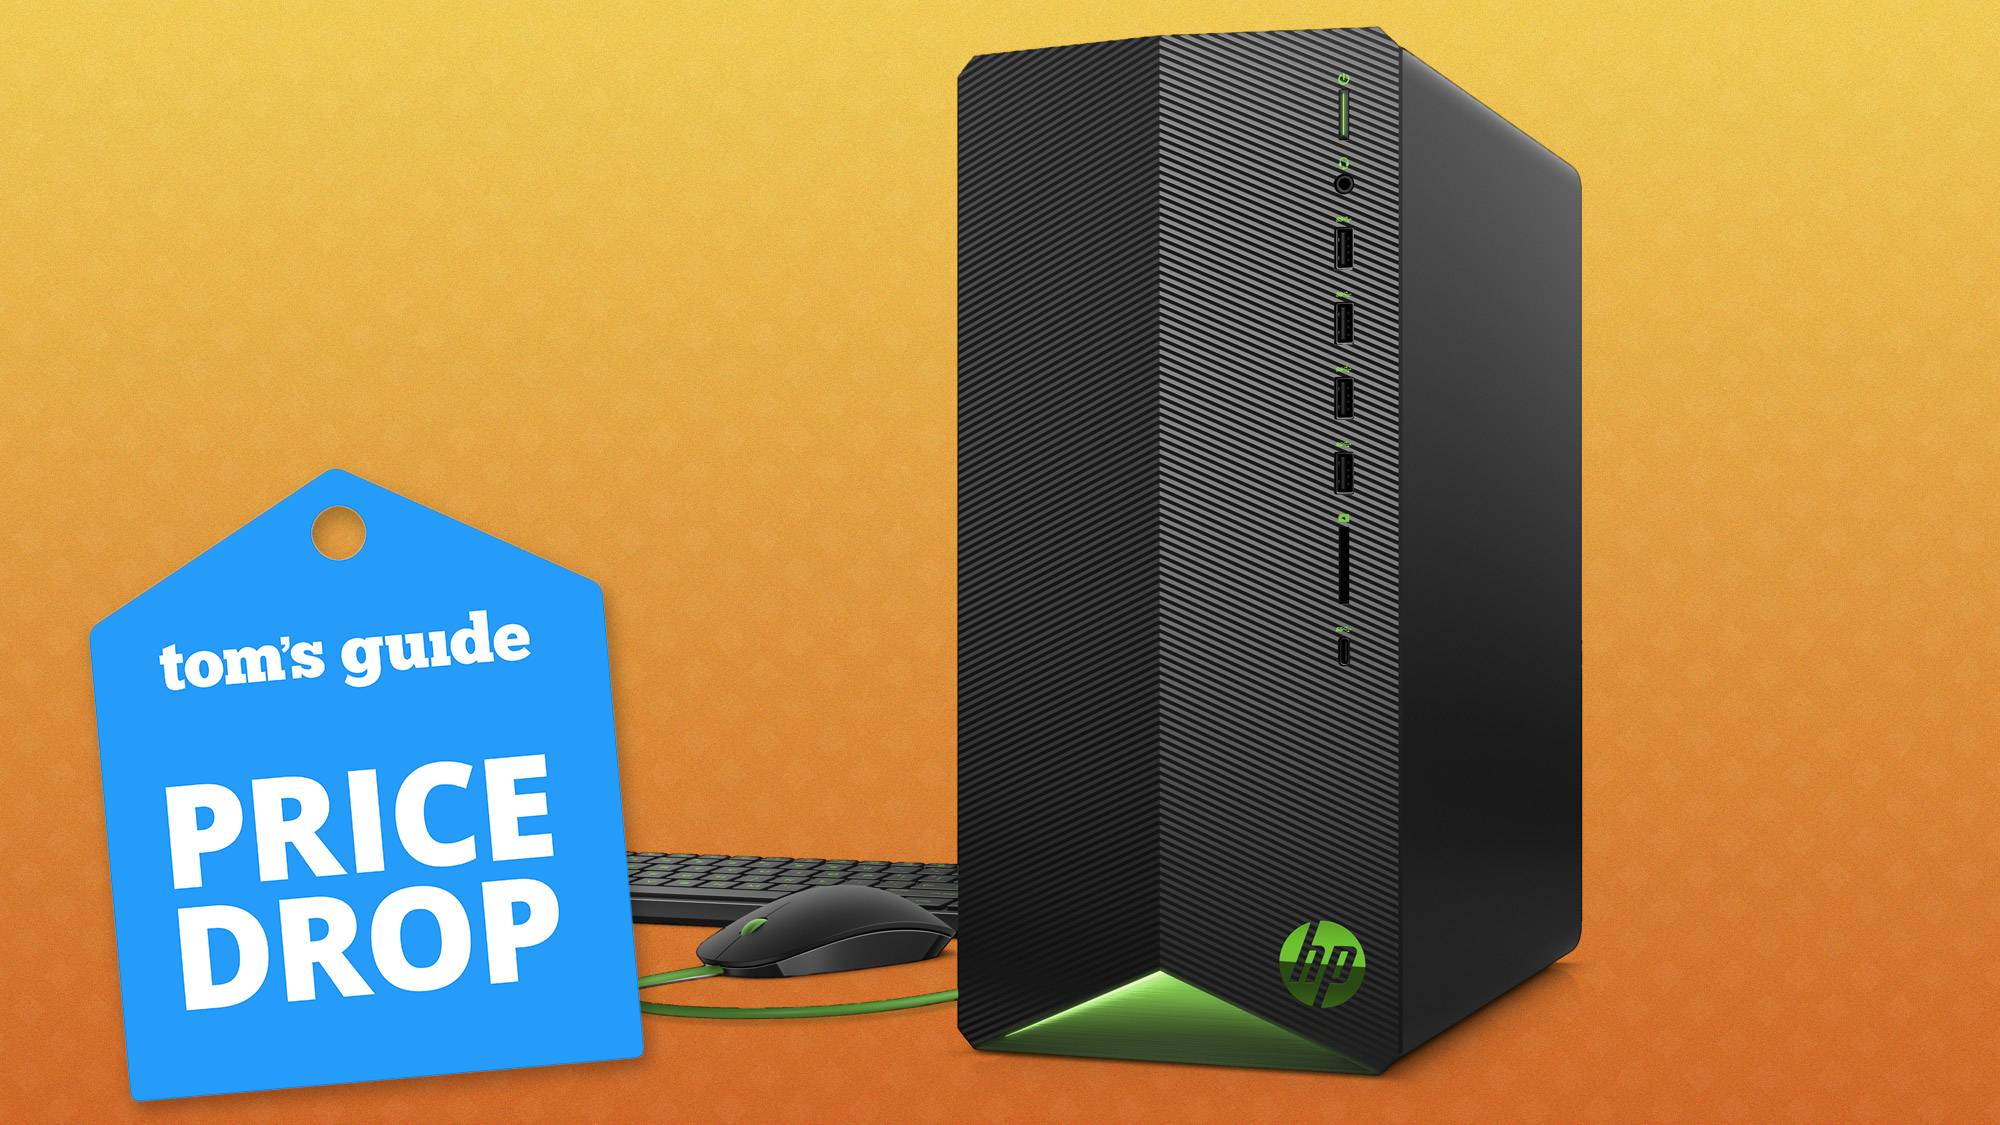 Act fast! HP's RTX 3060 gaming PC is on sale right now | Tom's Guide